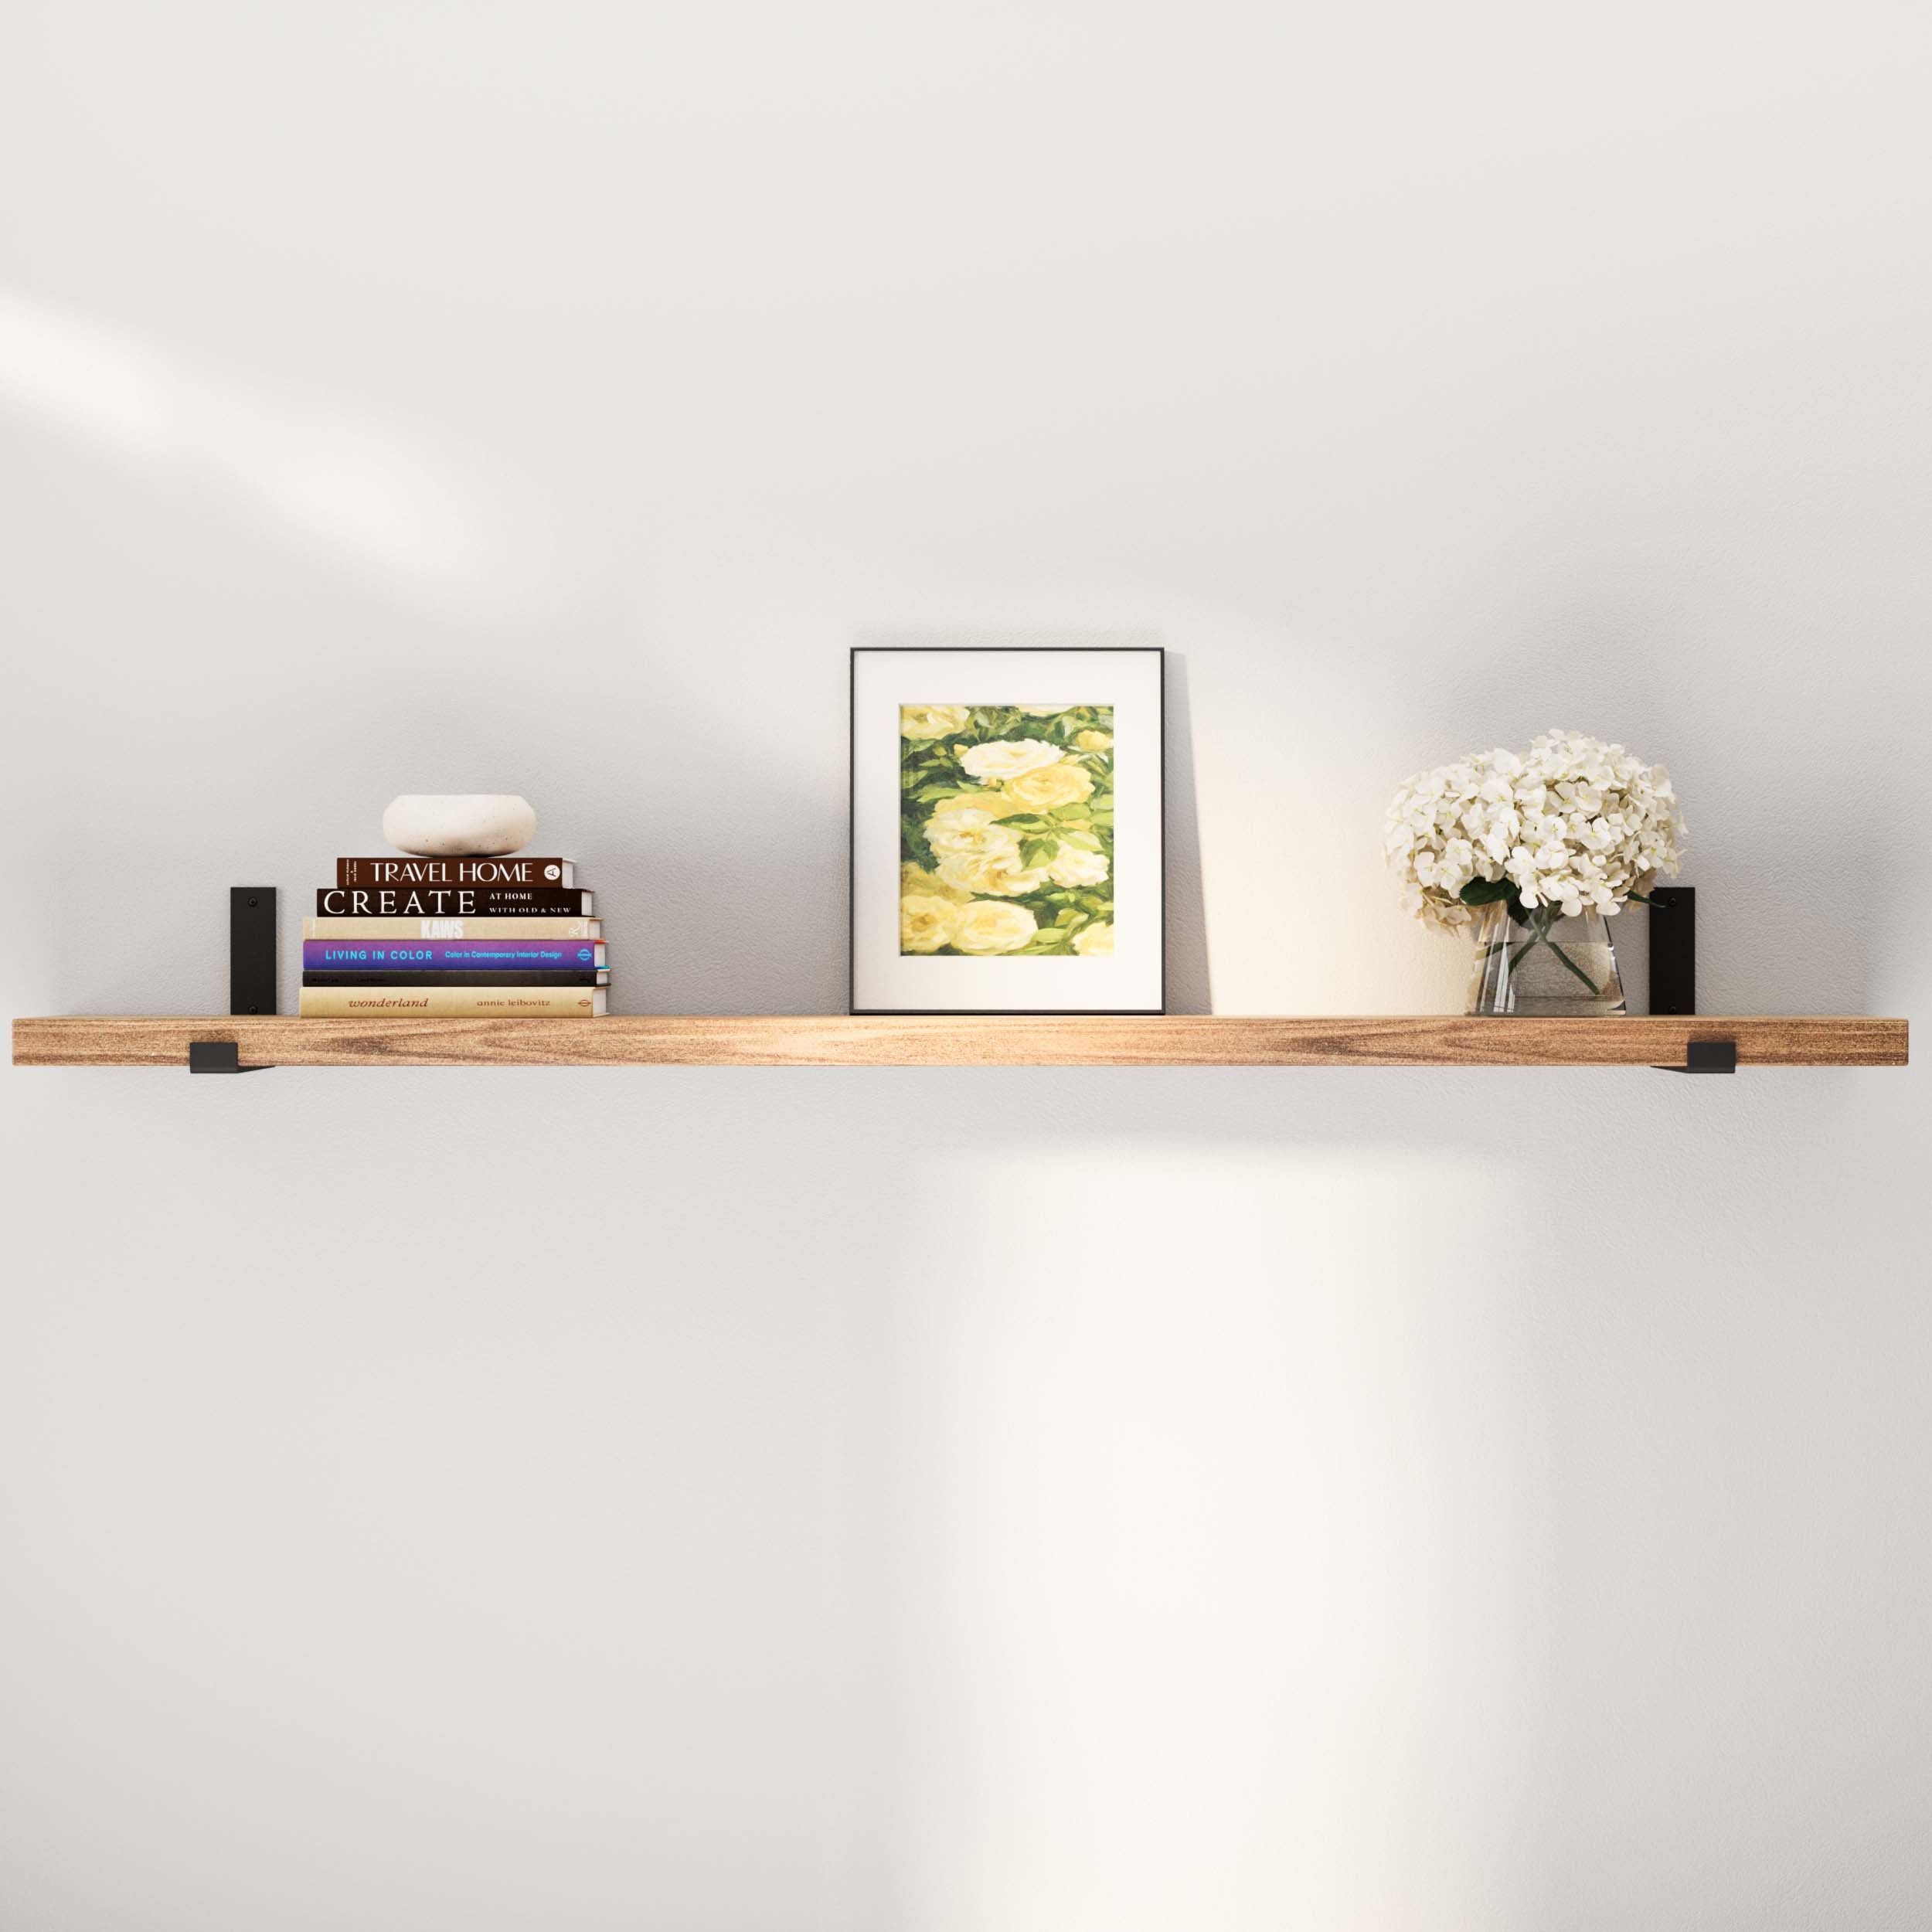 A single long wooden shelf on a wall displaying books and a vase of white flowers, creating a minimalistic aesthetic.